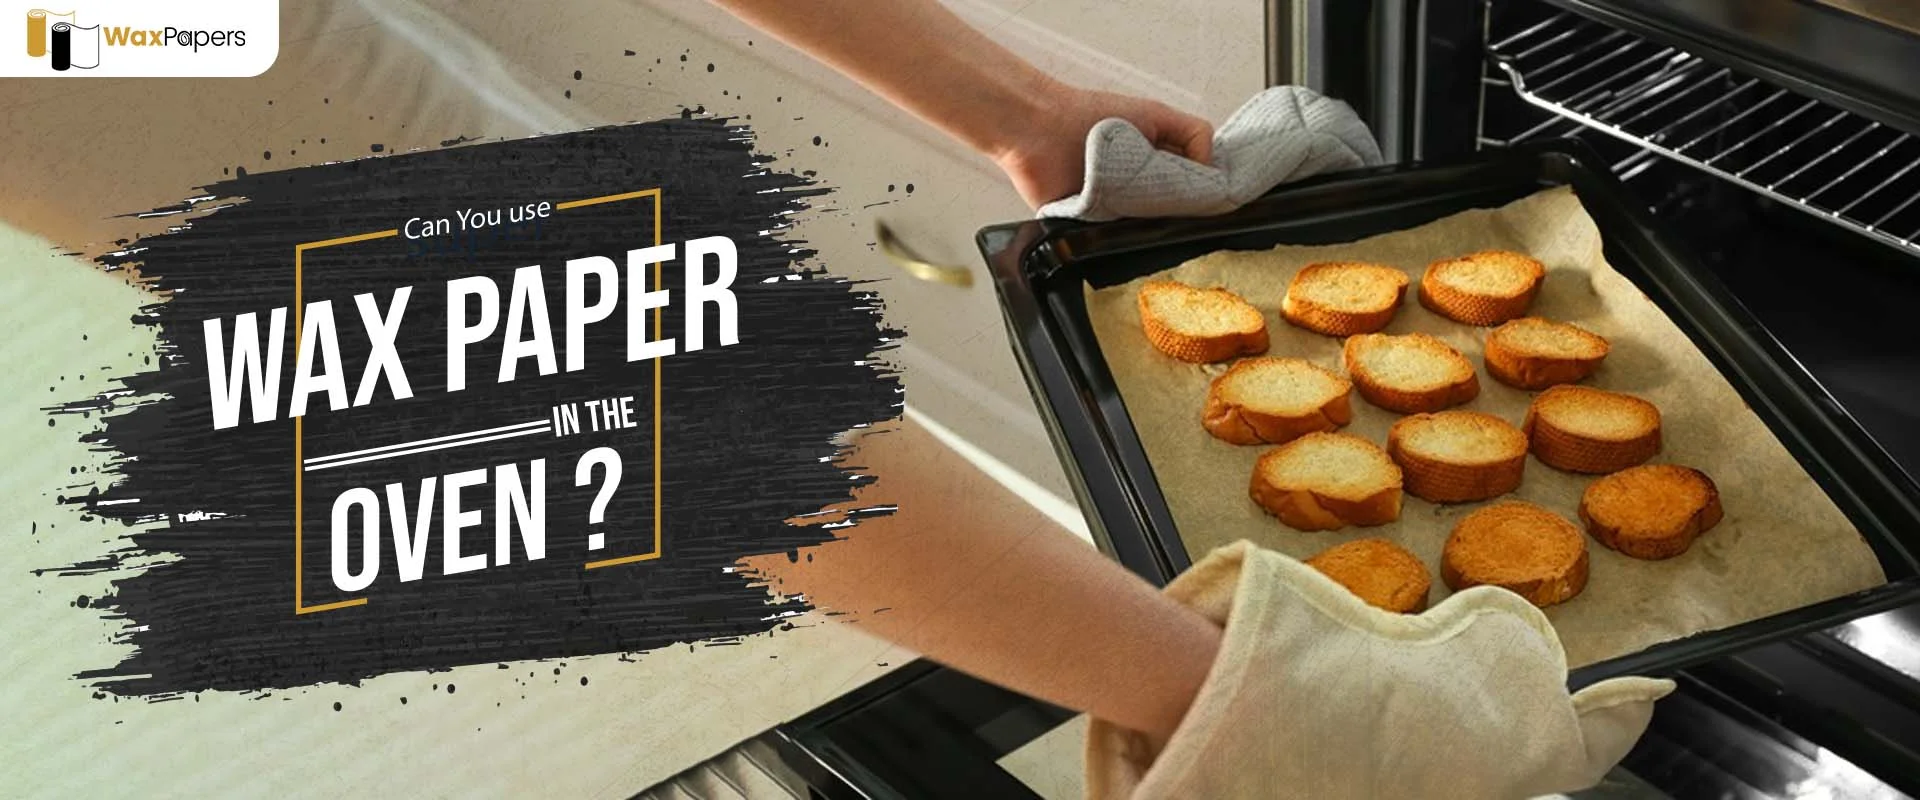 Can You Use Wax Paper In The Oven?